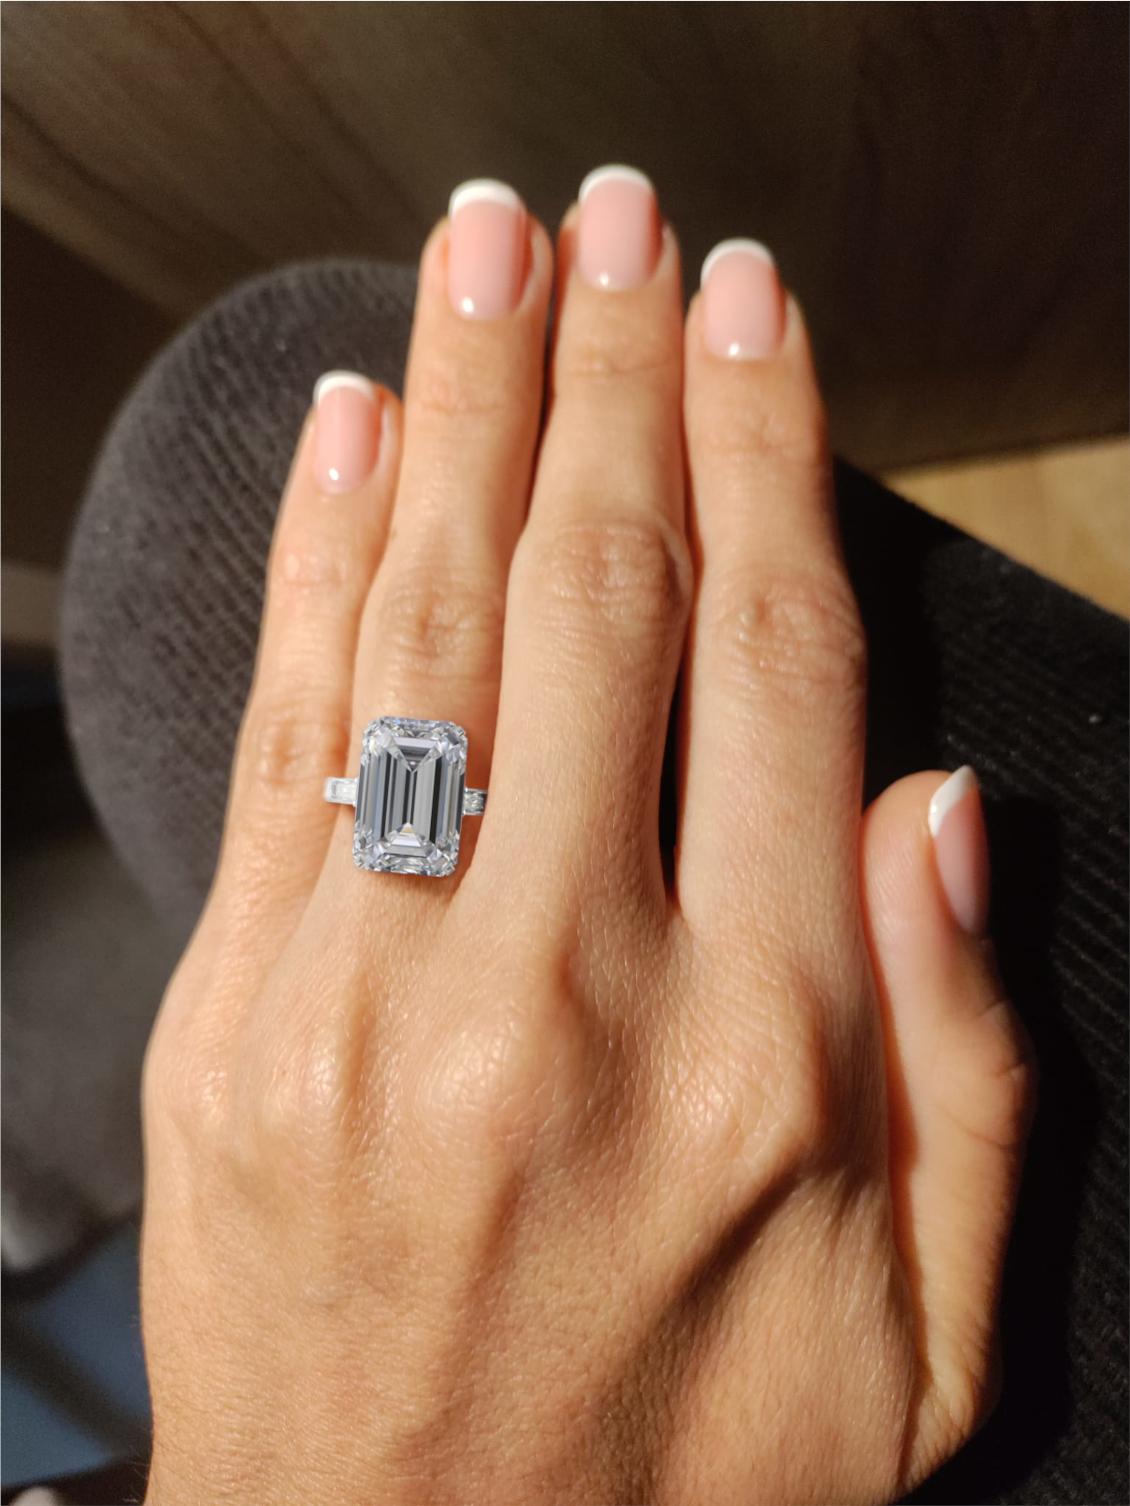 An exquisite 8.50 Emerlald cut diamond ring. The main stone is an incredible 8 carat emerald cut diamond vs2 clarity e color and excellent polish and very good cut. 

This diamond has a great ratio so it actually looks bigger 